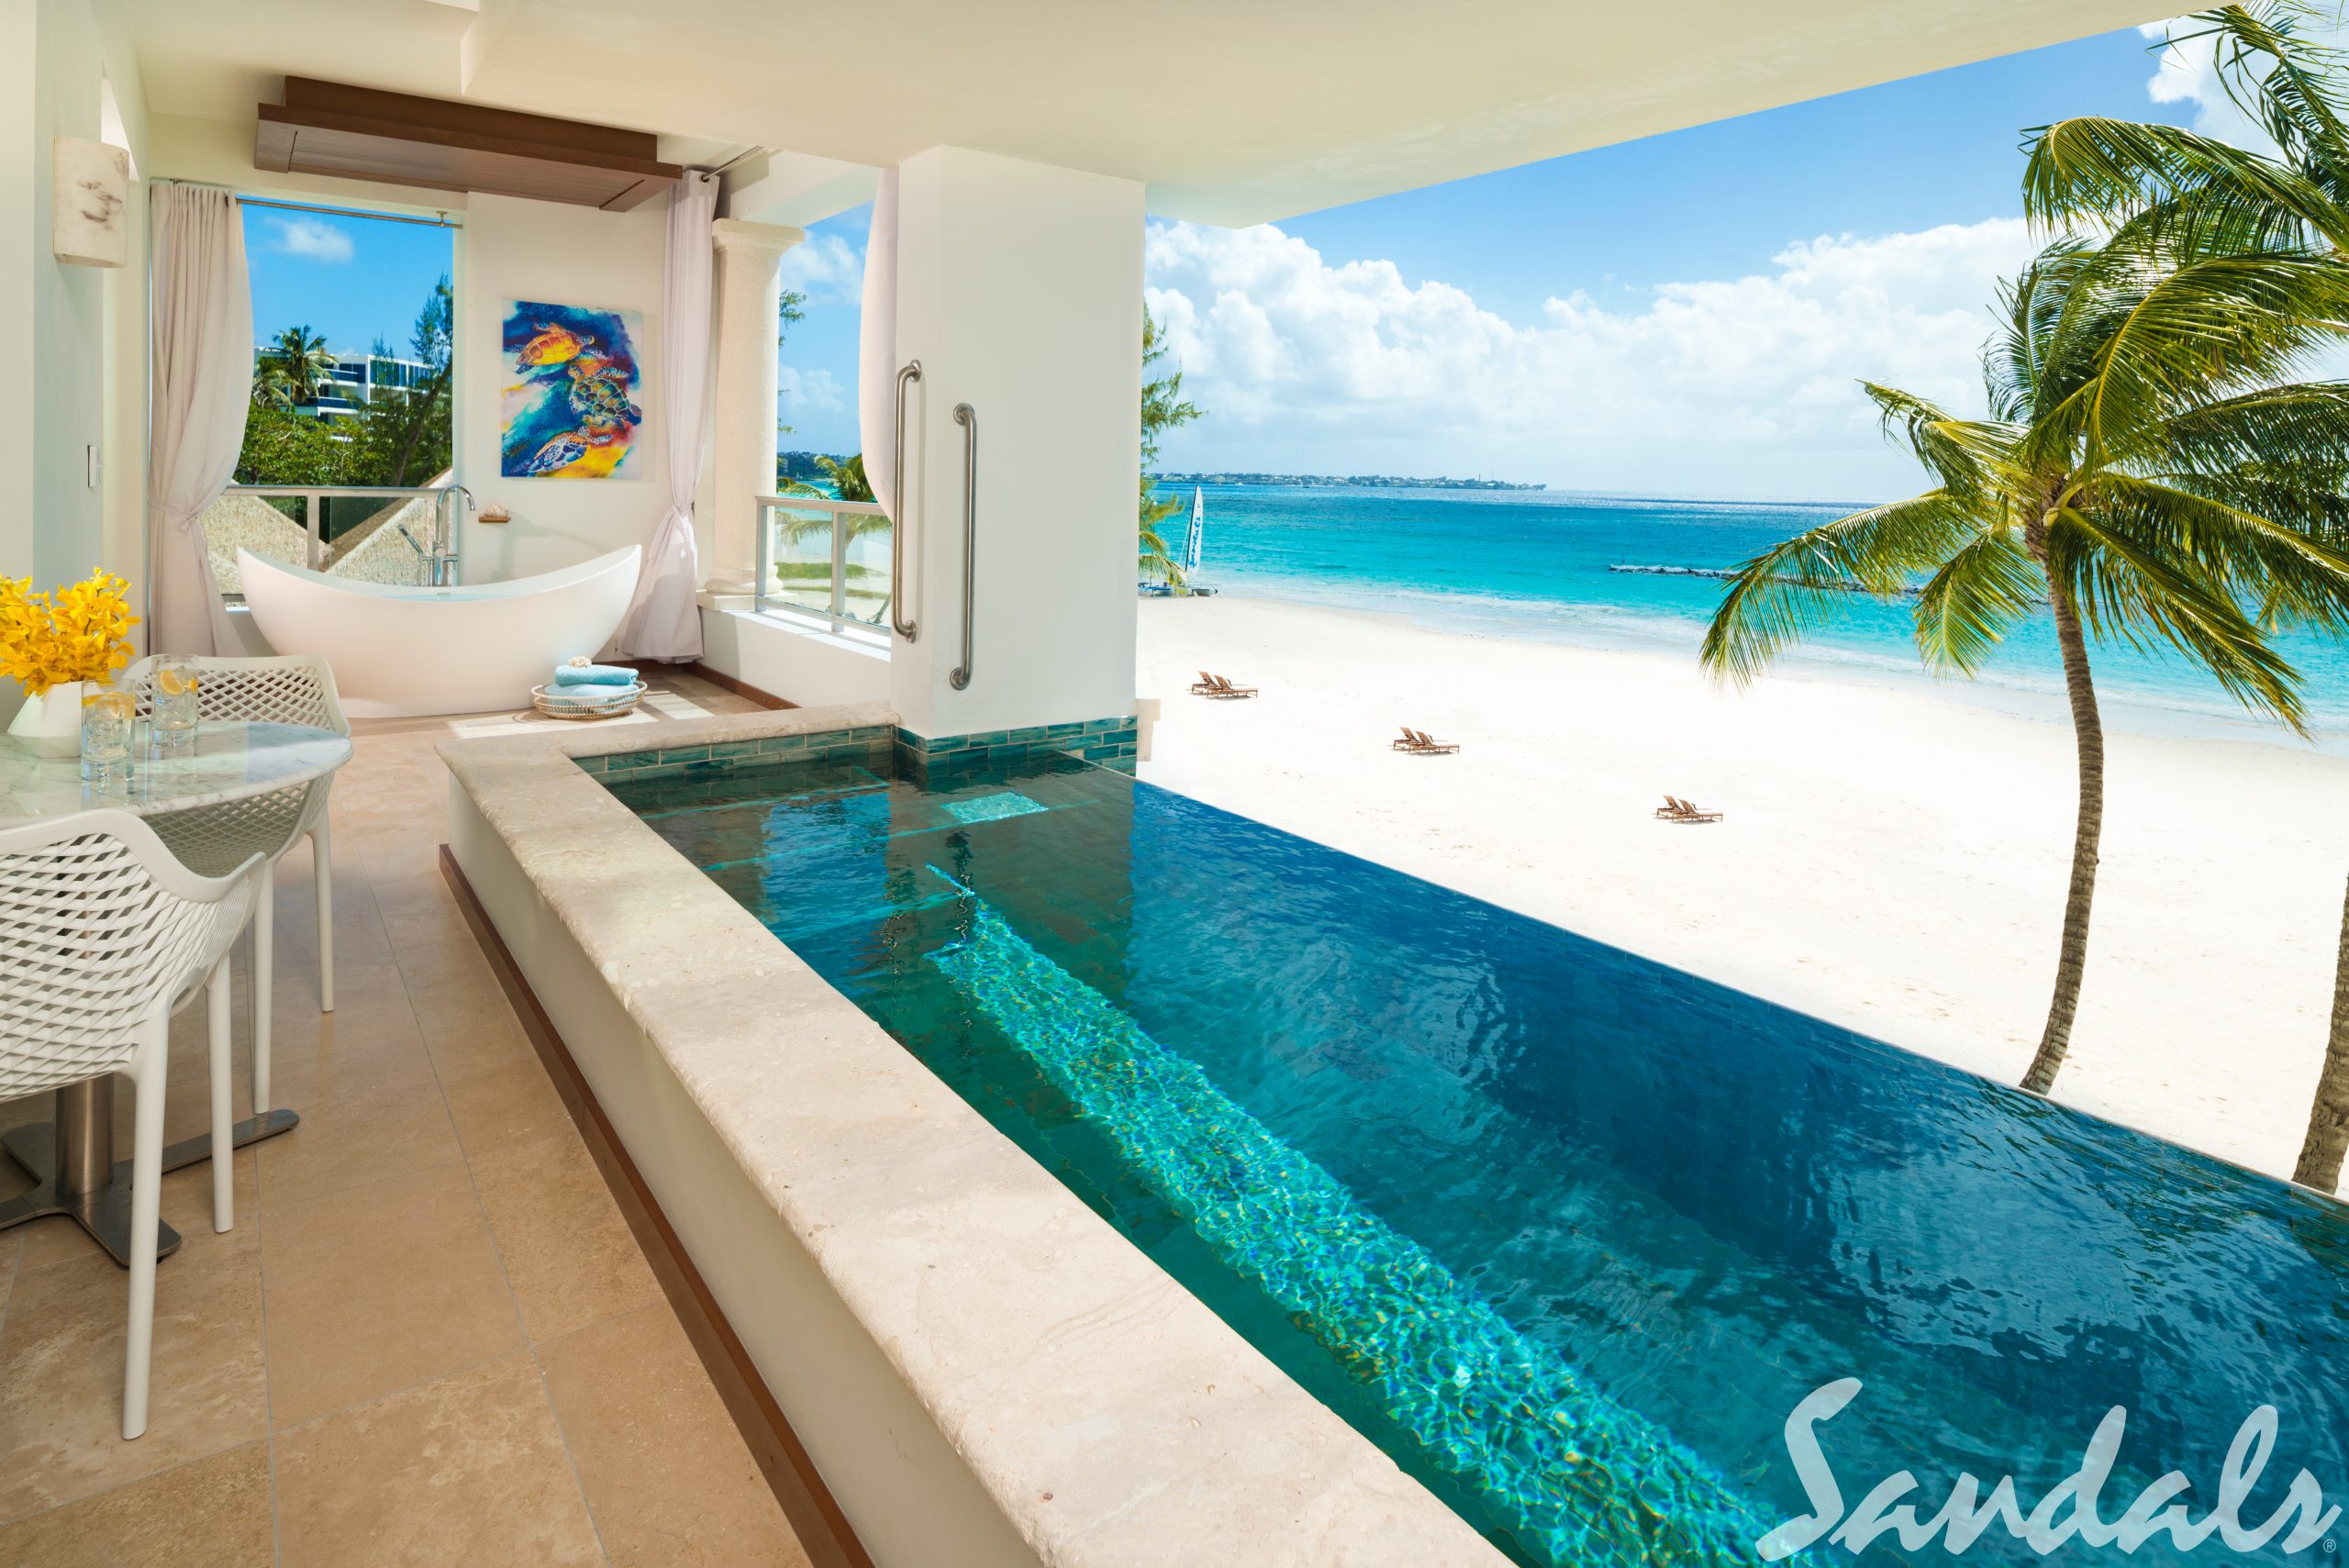 Sandals Resorts in Barbados